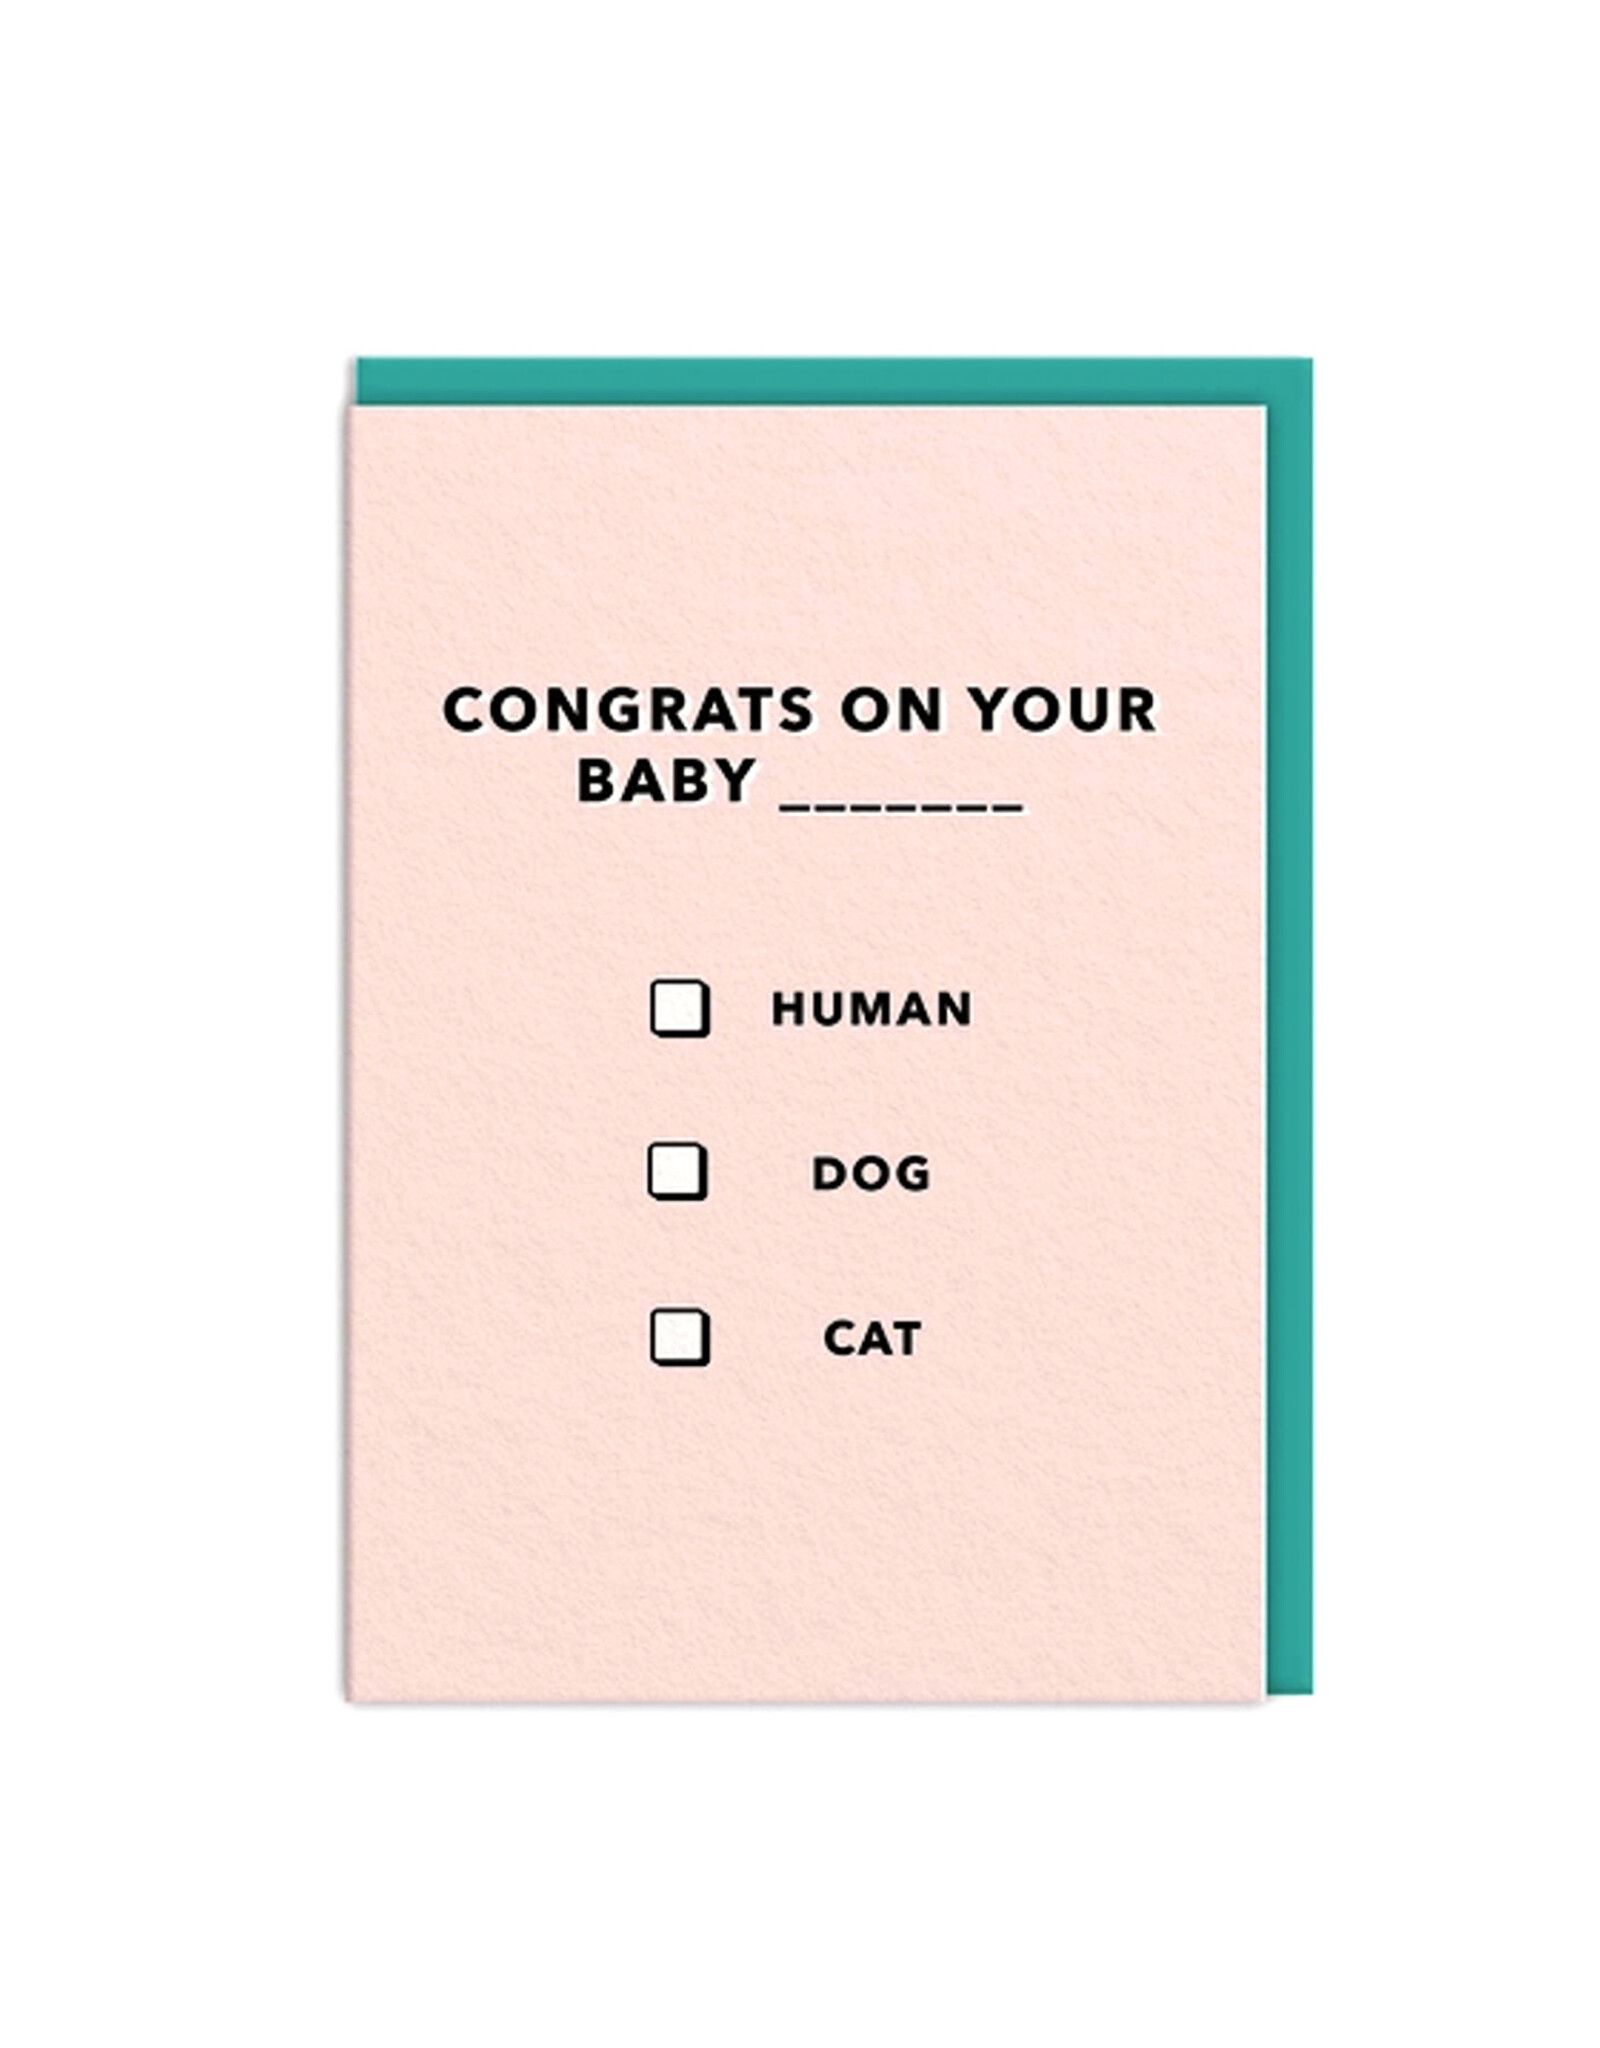 Congrats On Your Baby INSERT HERE Greeting Card